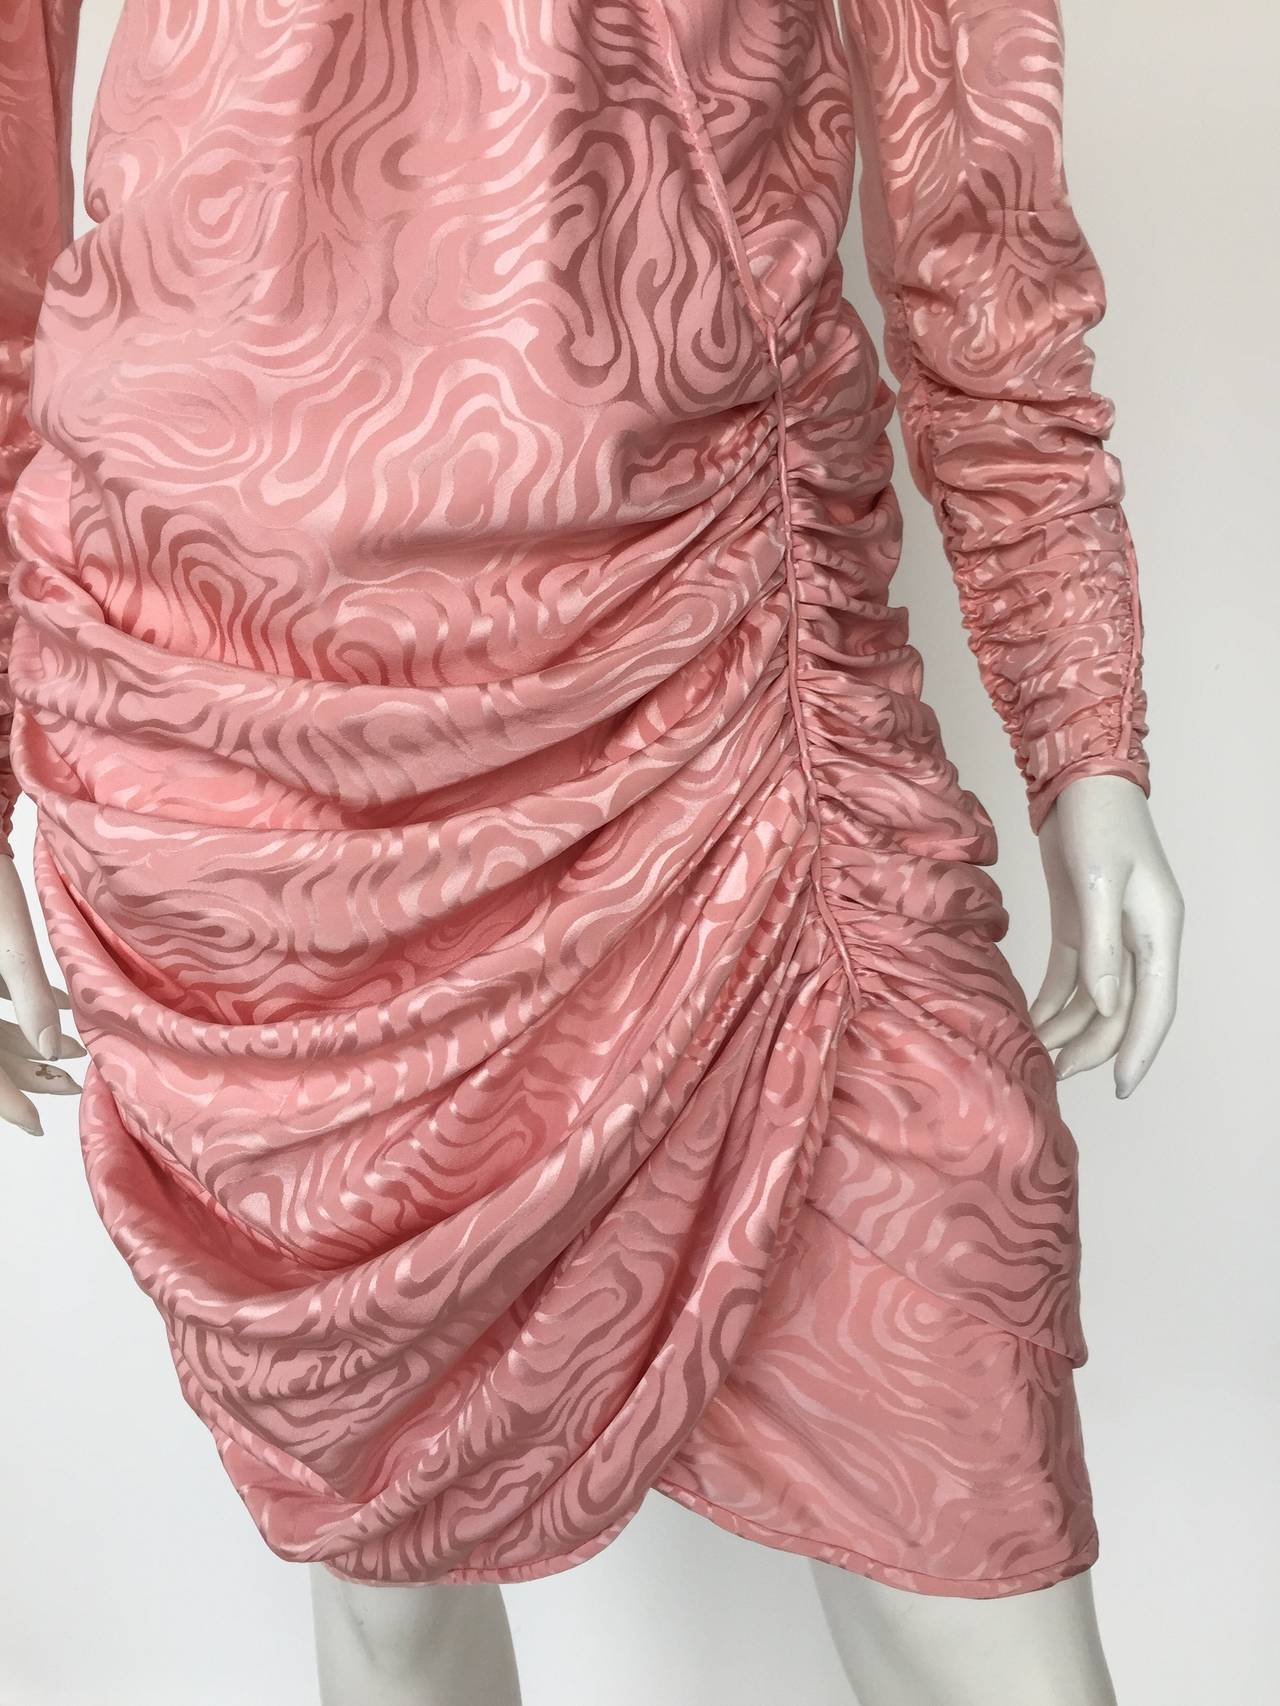 Emanuel Ungaro Parallele Paris late 1970s silk ruche dress original size 8 but fits like a modern size 6.  Ladies please use your measuring tape so you can properly measure your lovely body to make certain this will fit you to perfection. Made in